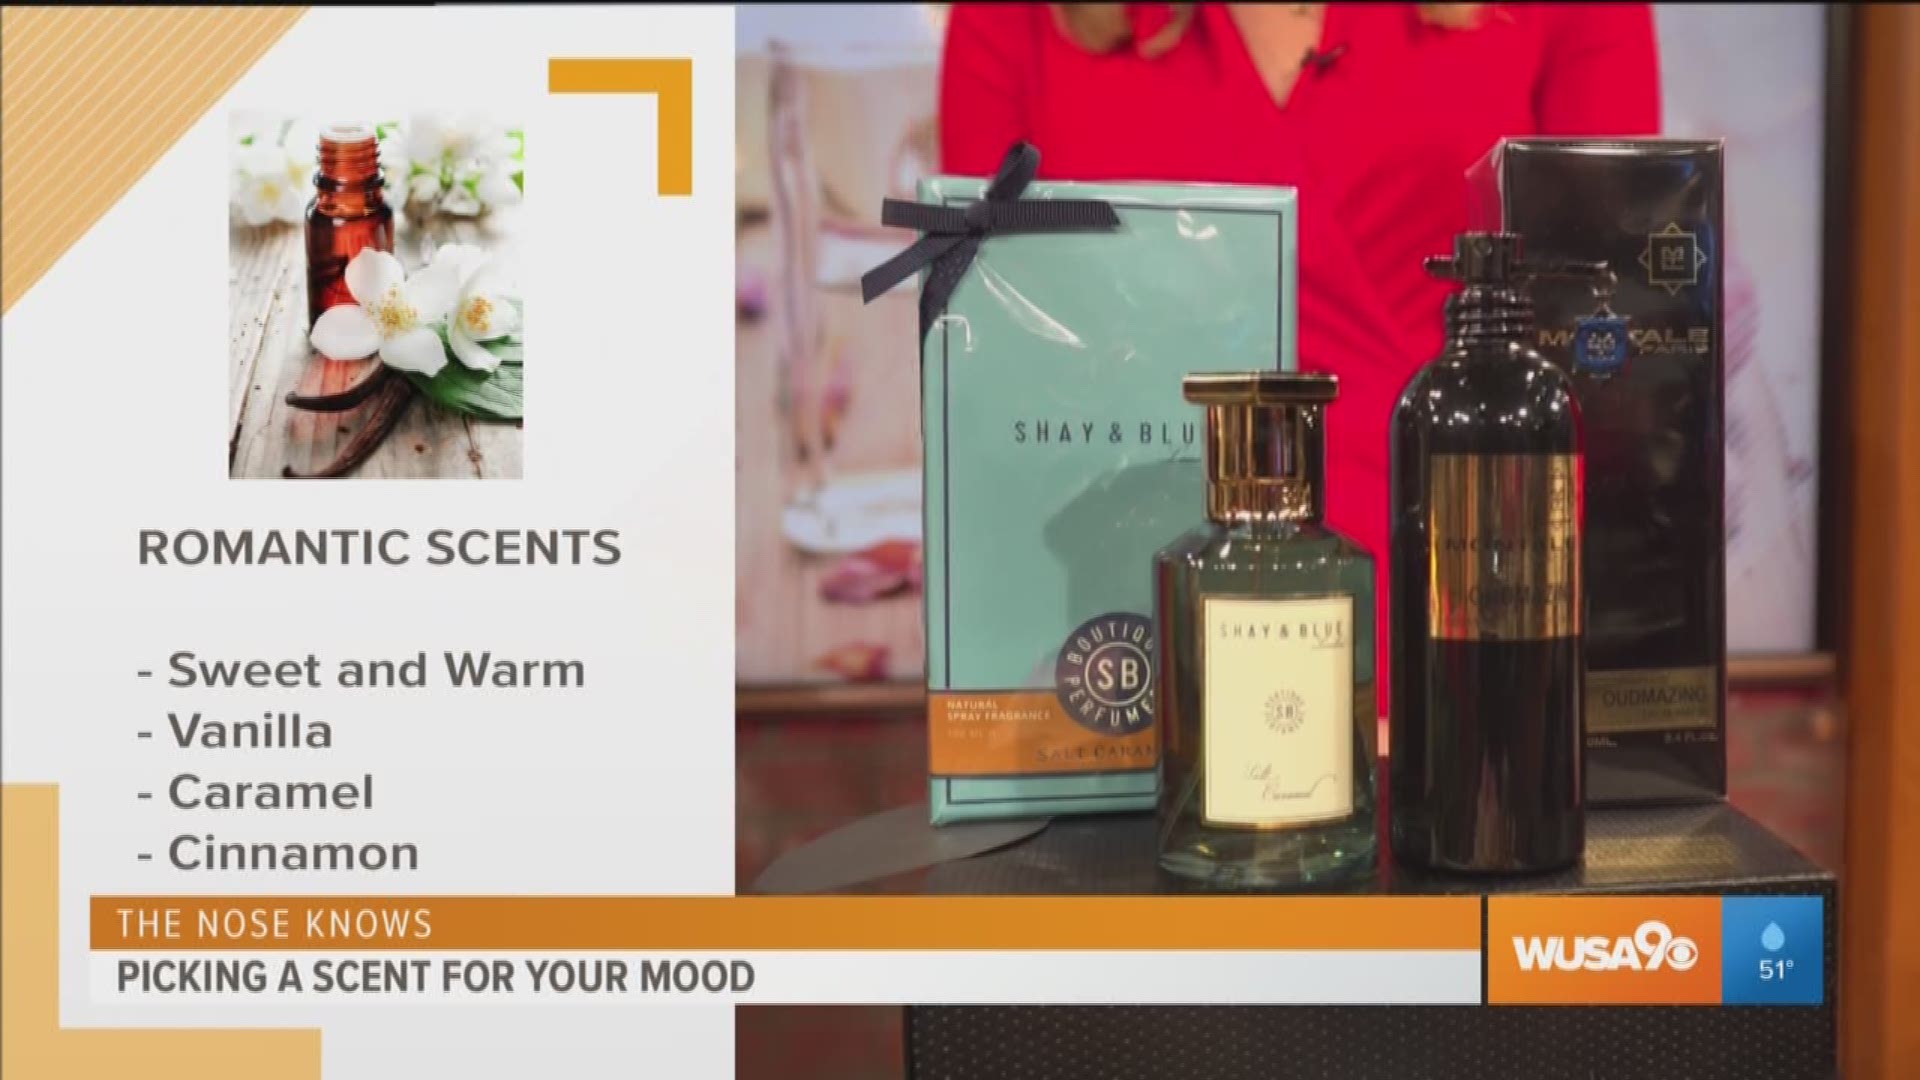 Fragrance Specialist and LUXSB – Luxury Scent Box CEO, Layla Zagwallski helps with tips for specific notes you should look for in a fragrance to enhance your mood.